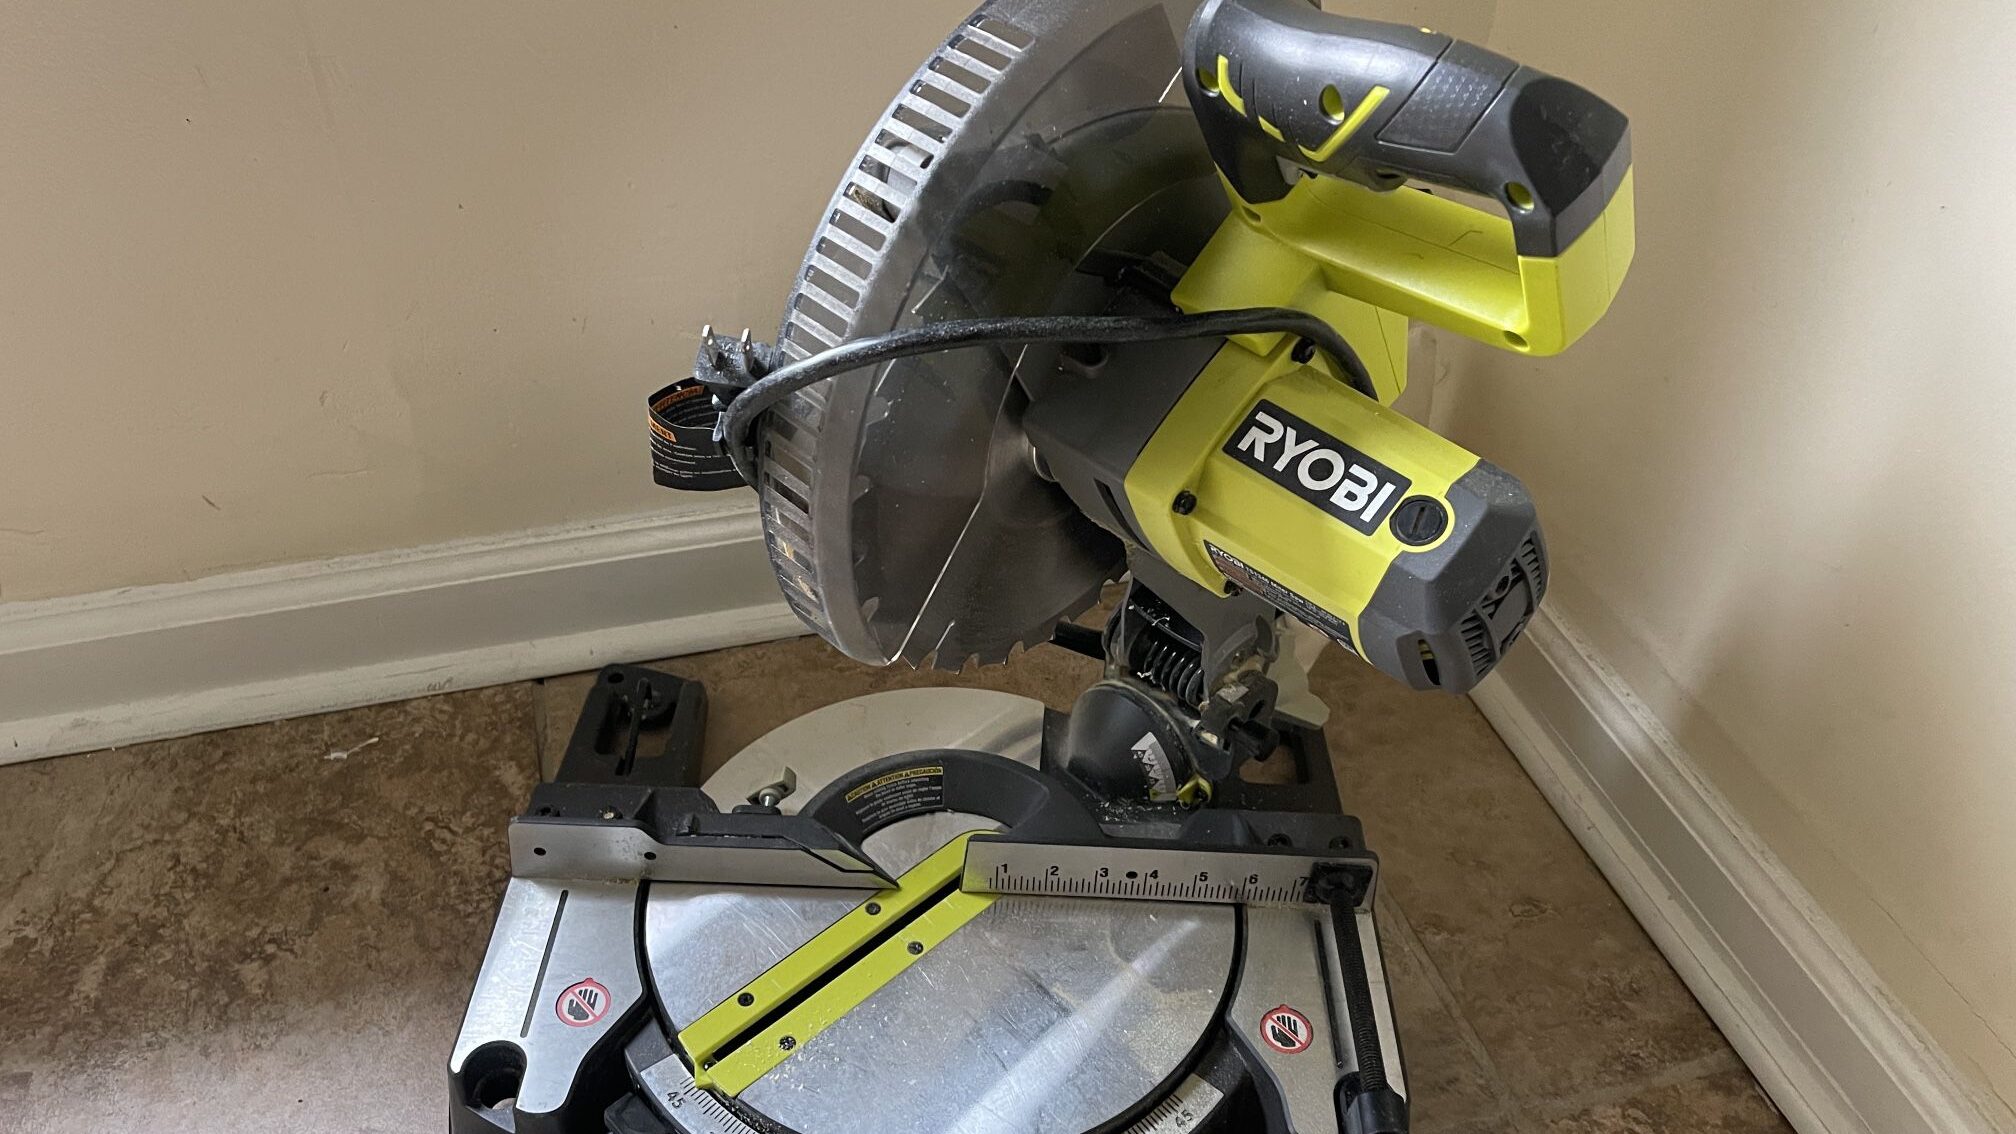 Advantages of a 10-inch Miter Saw